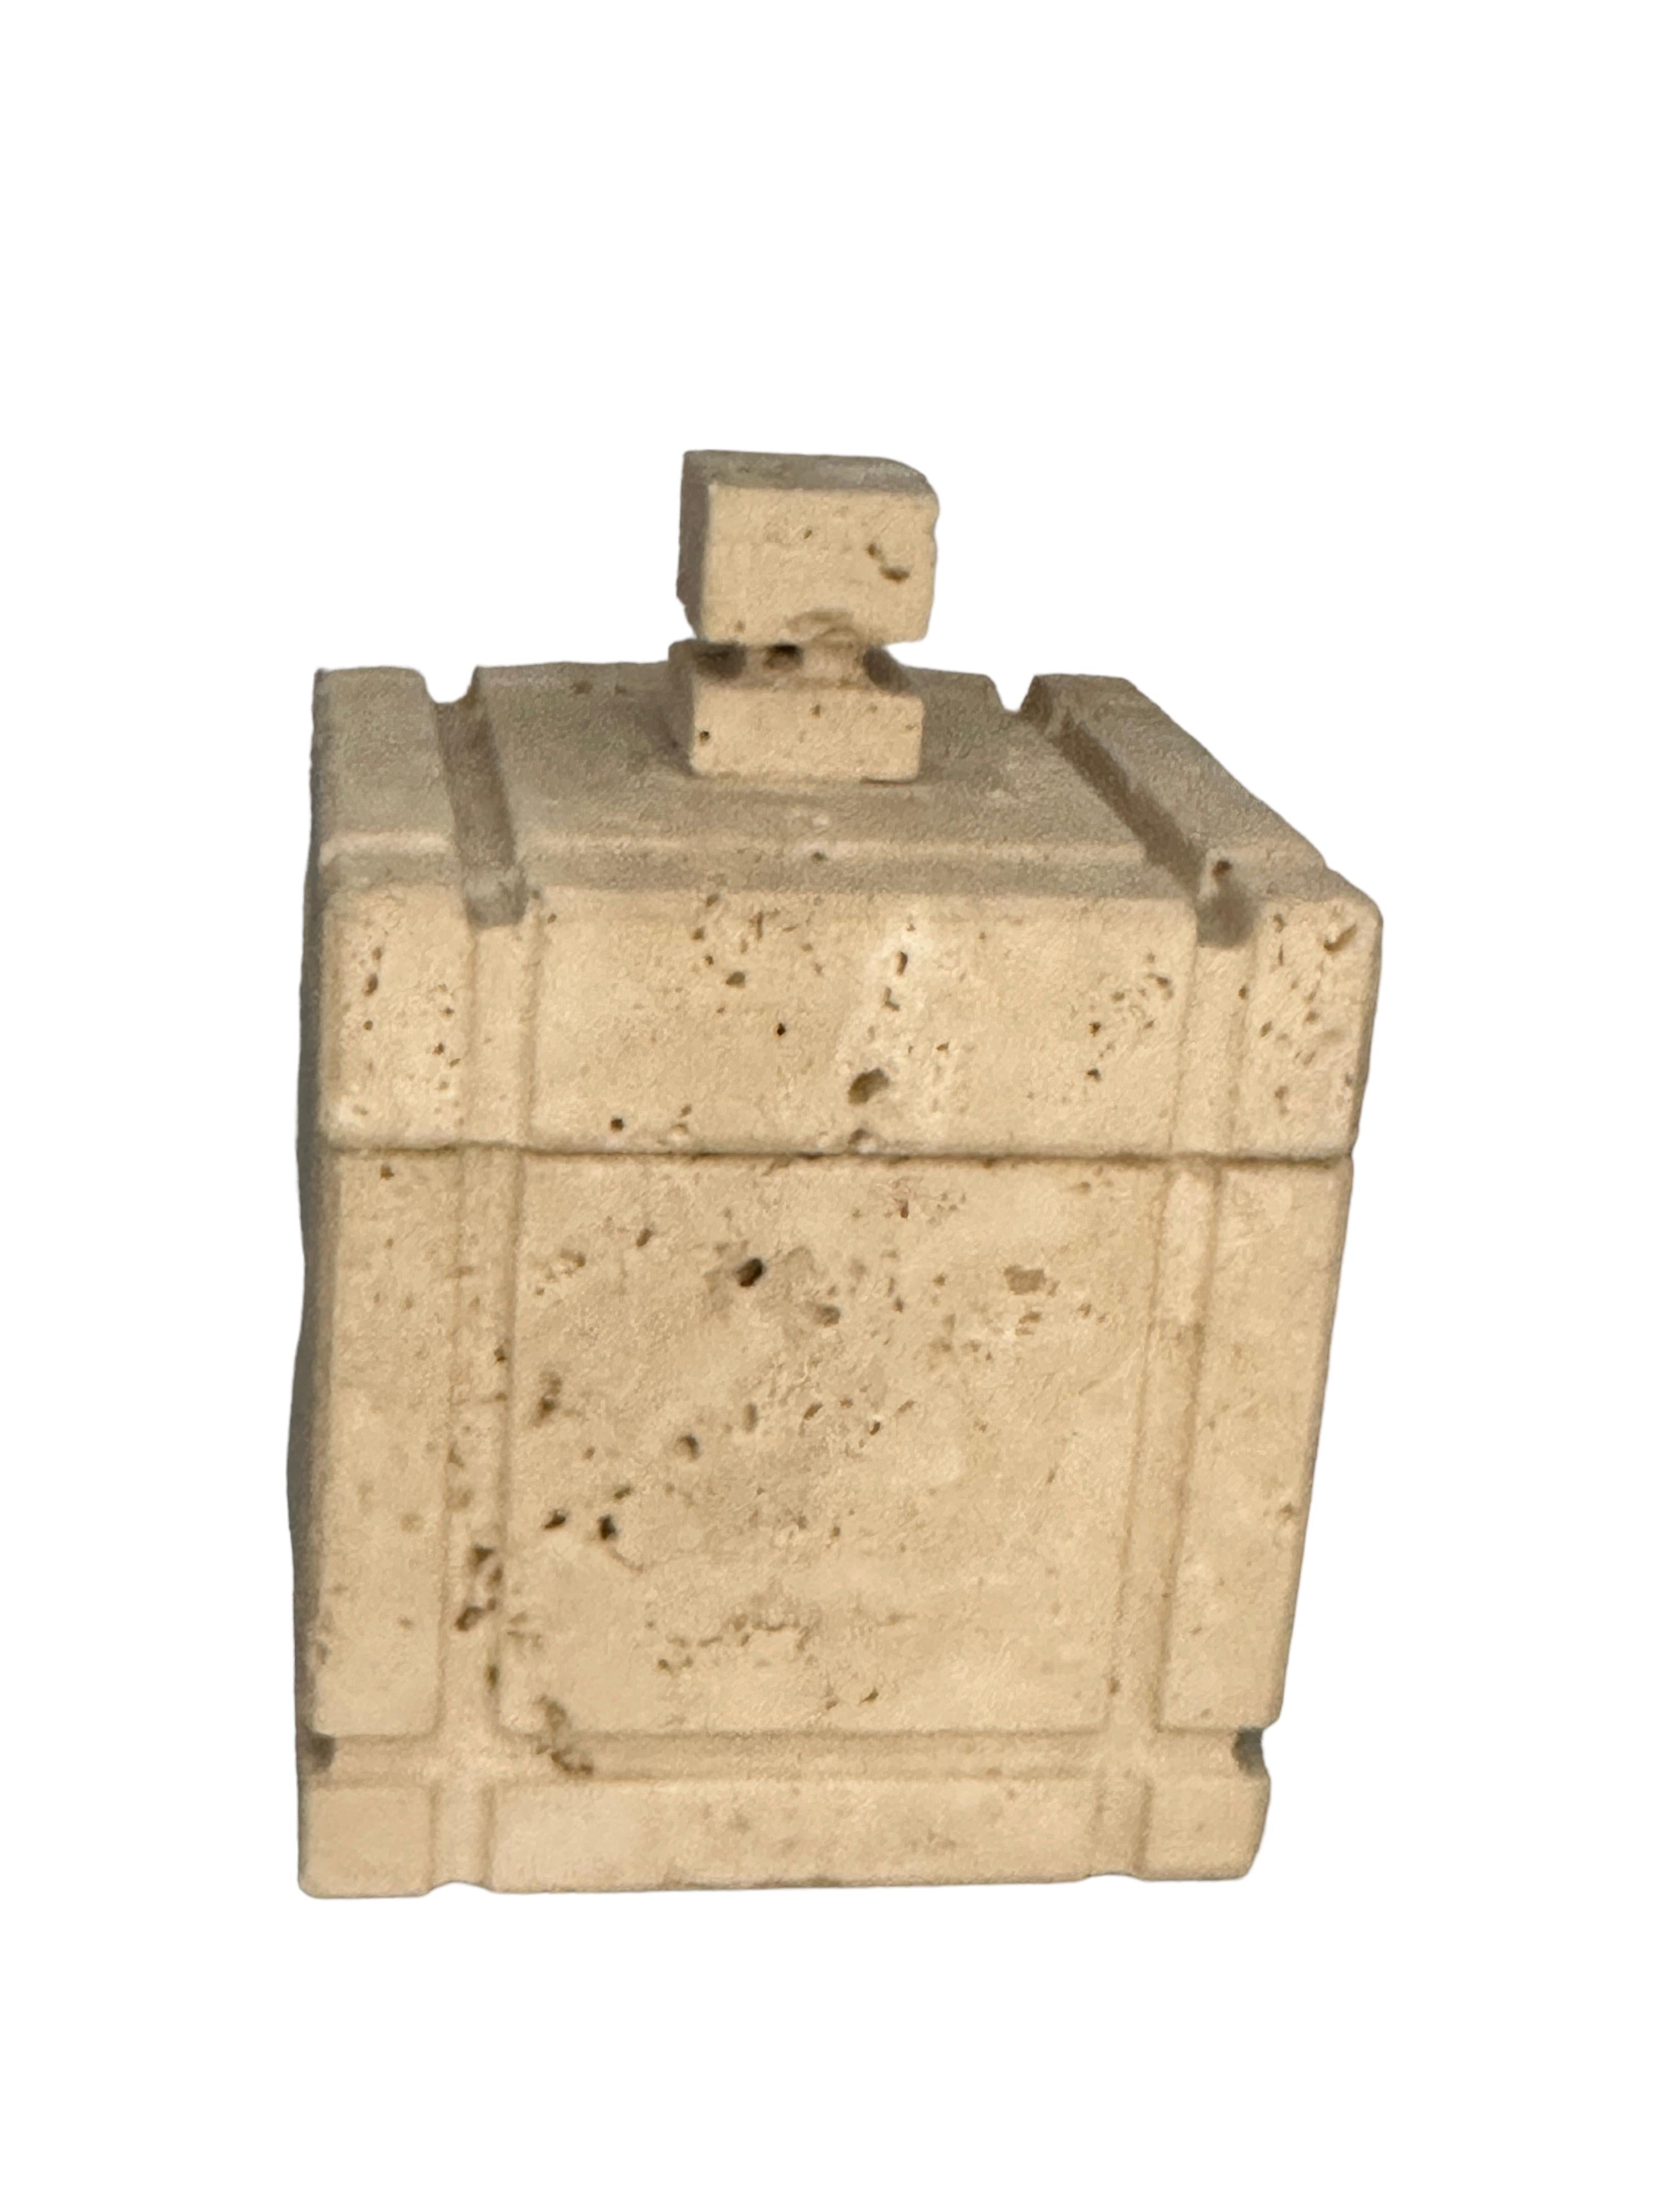 Midcentury Travertine Marble Italian Box Catchall by Fratelli Manelli, 1970s For Sale 2